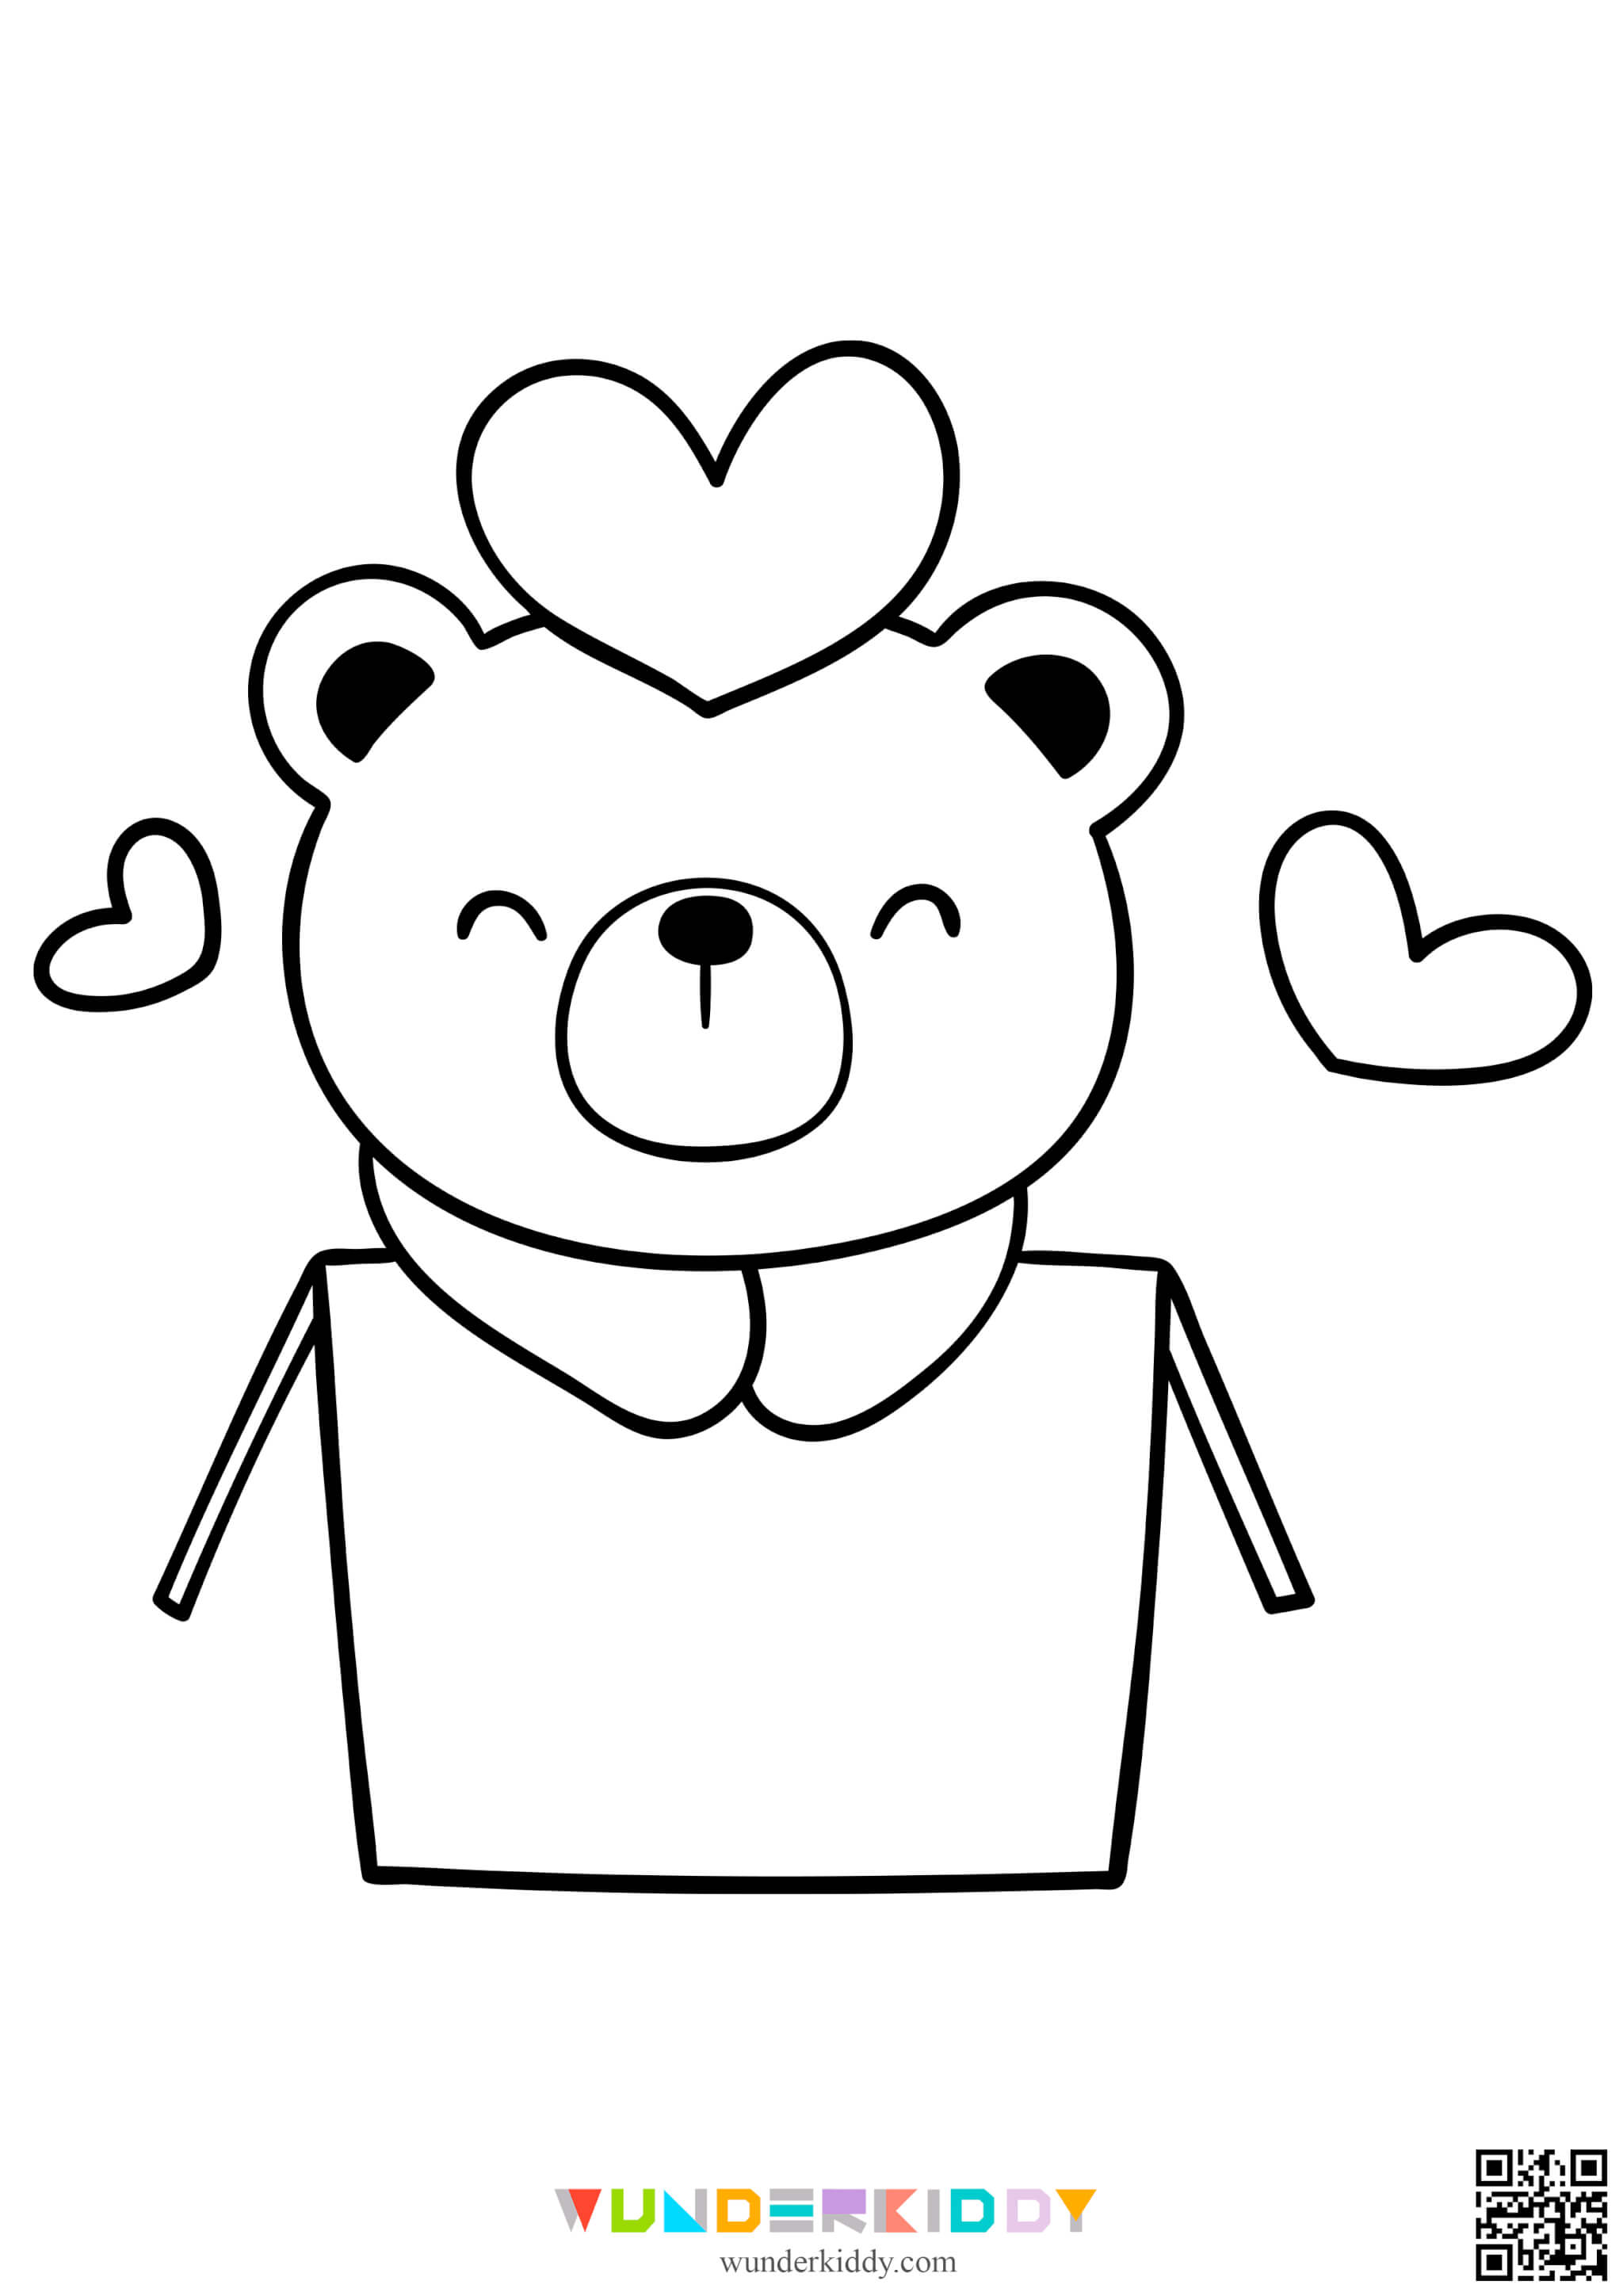 Valentines Coloring Pages - Image 5